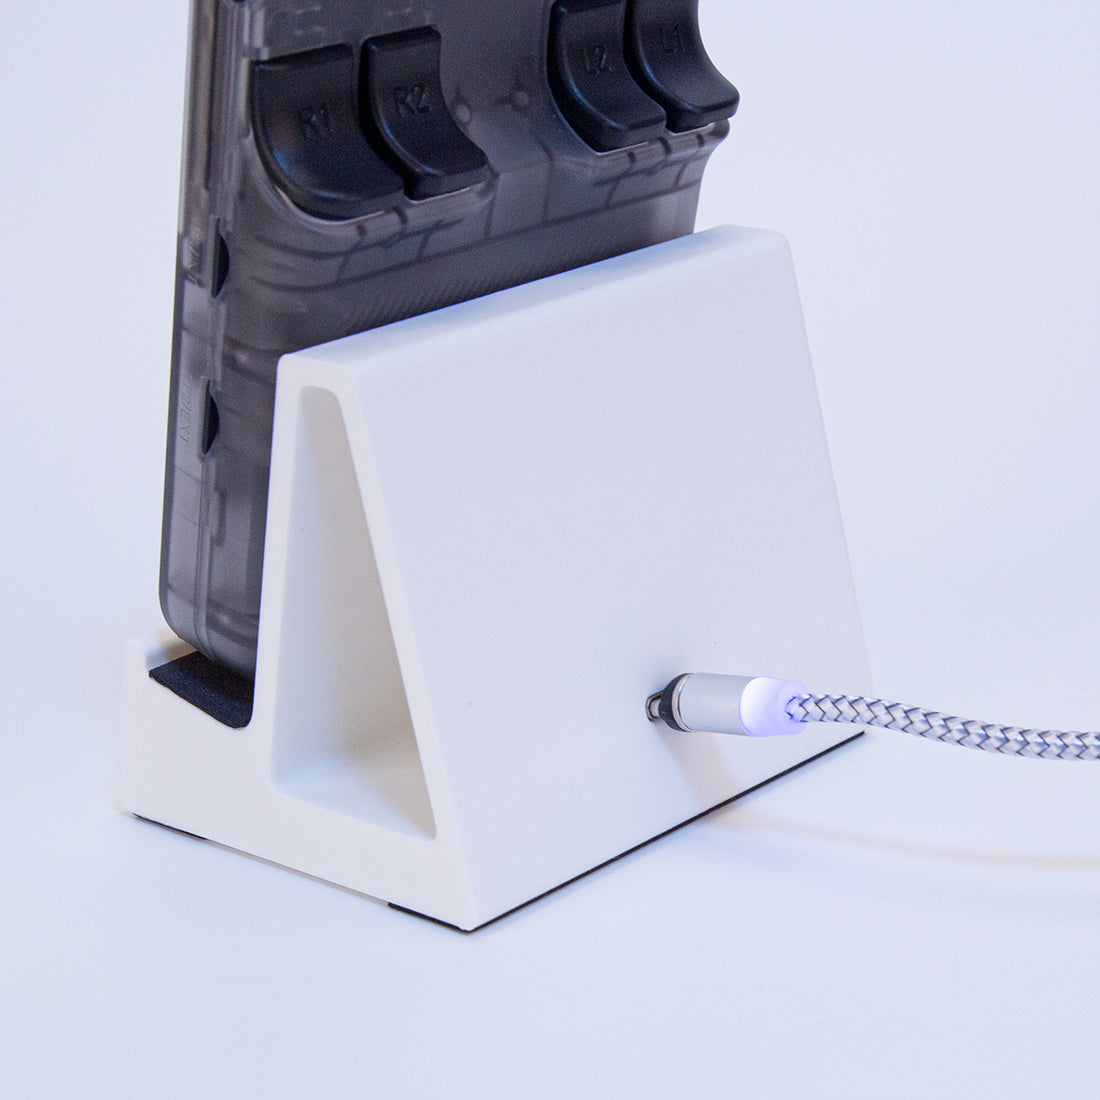 RG35XX Plus &RG35XX H Charging Stand Magnetic 3D Printed Must-have Accessories